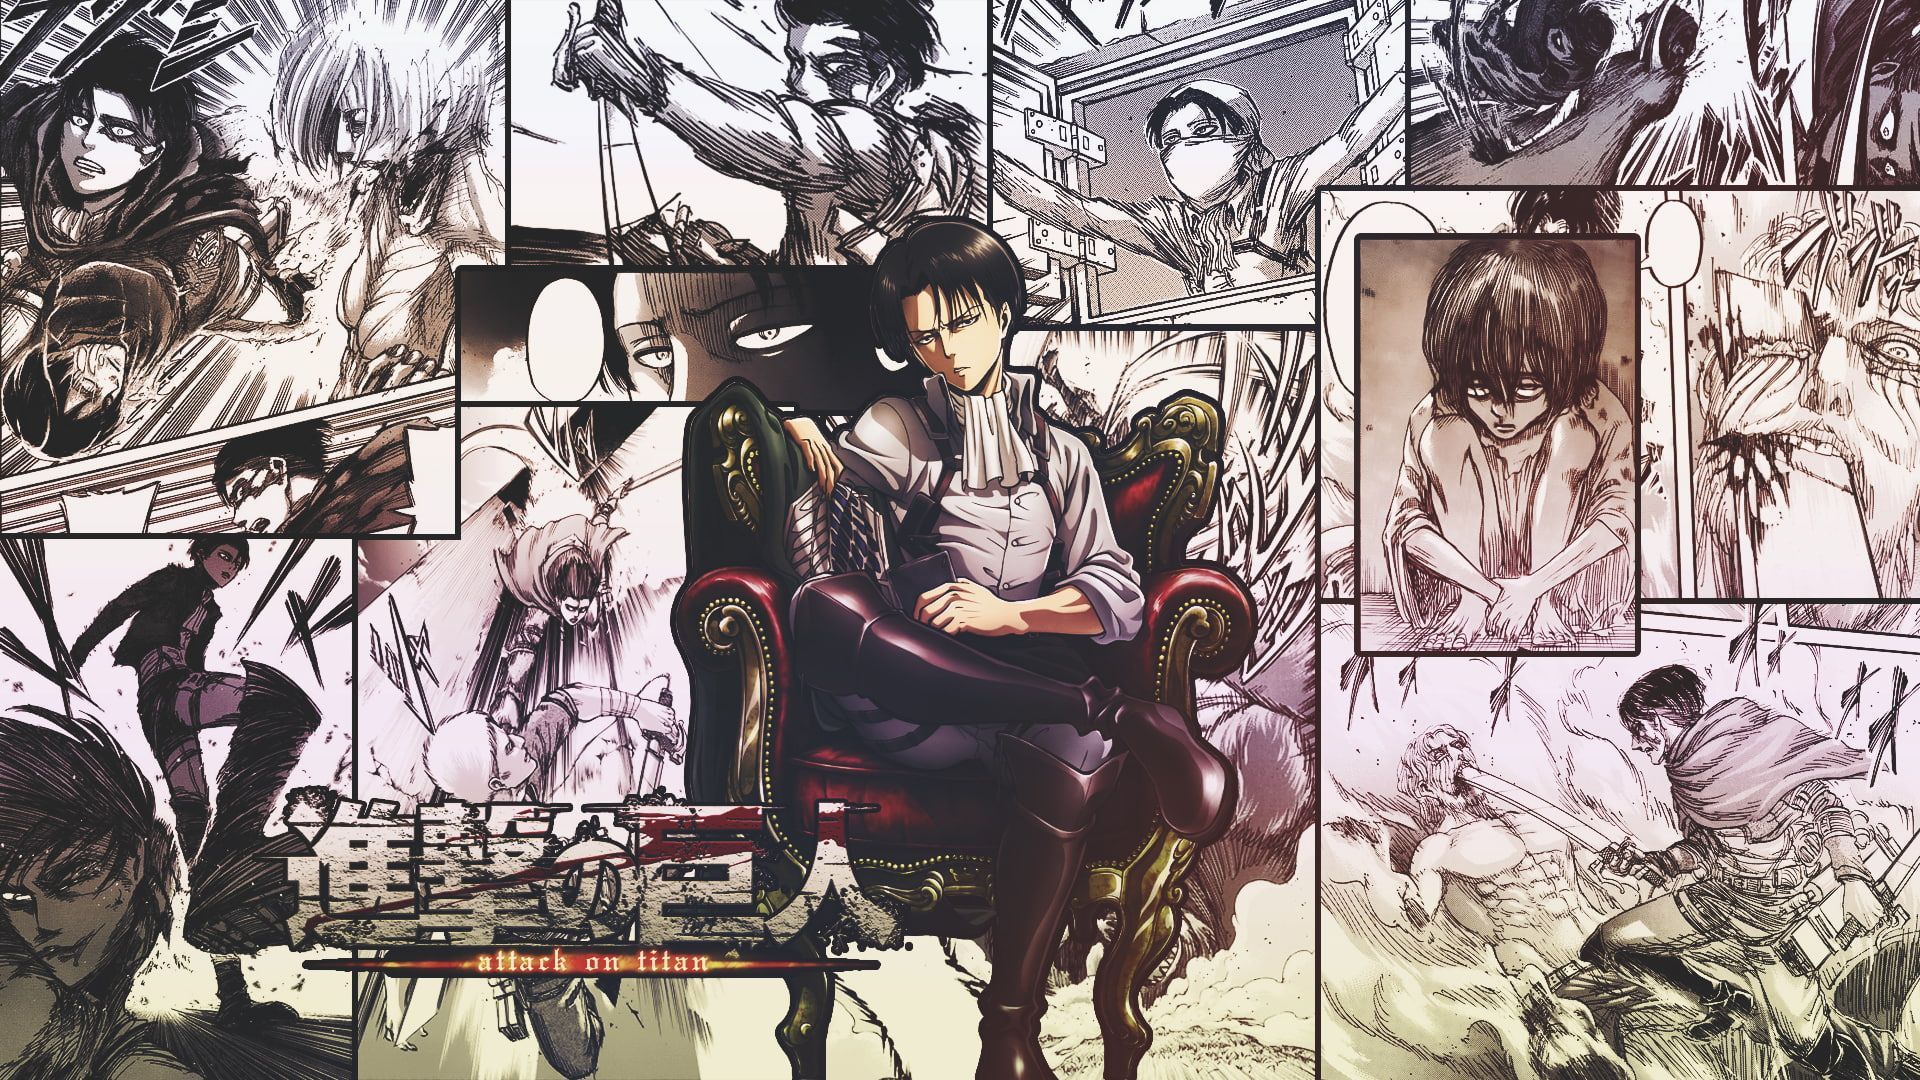 Attack on Titan collage wallpaper with Eren sitting on a chair - Attack On Titan